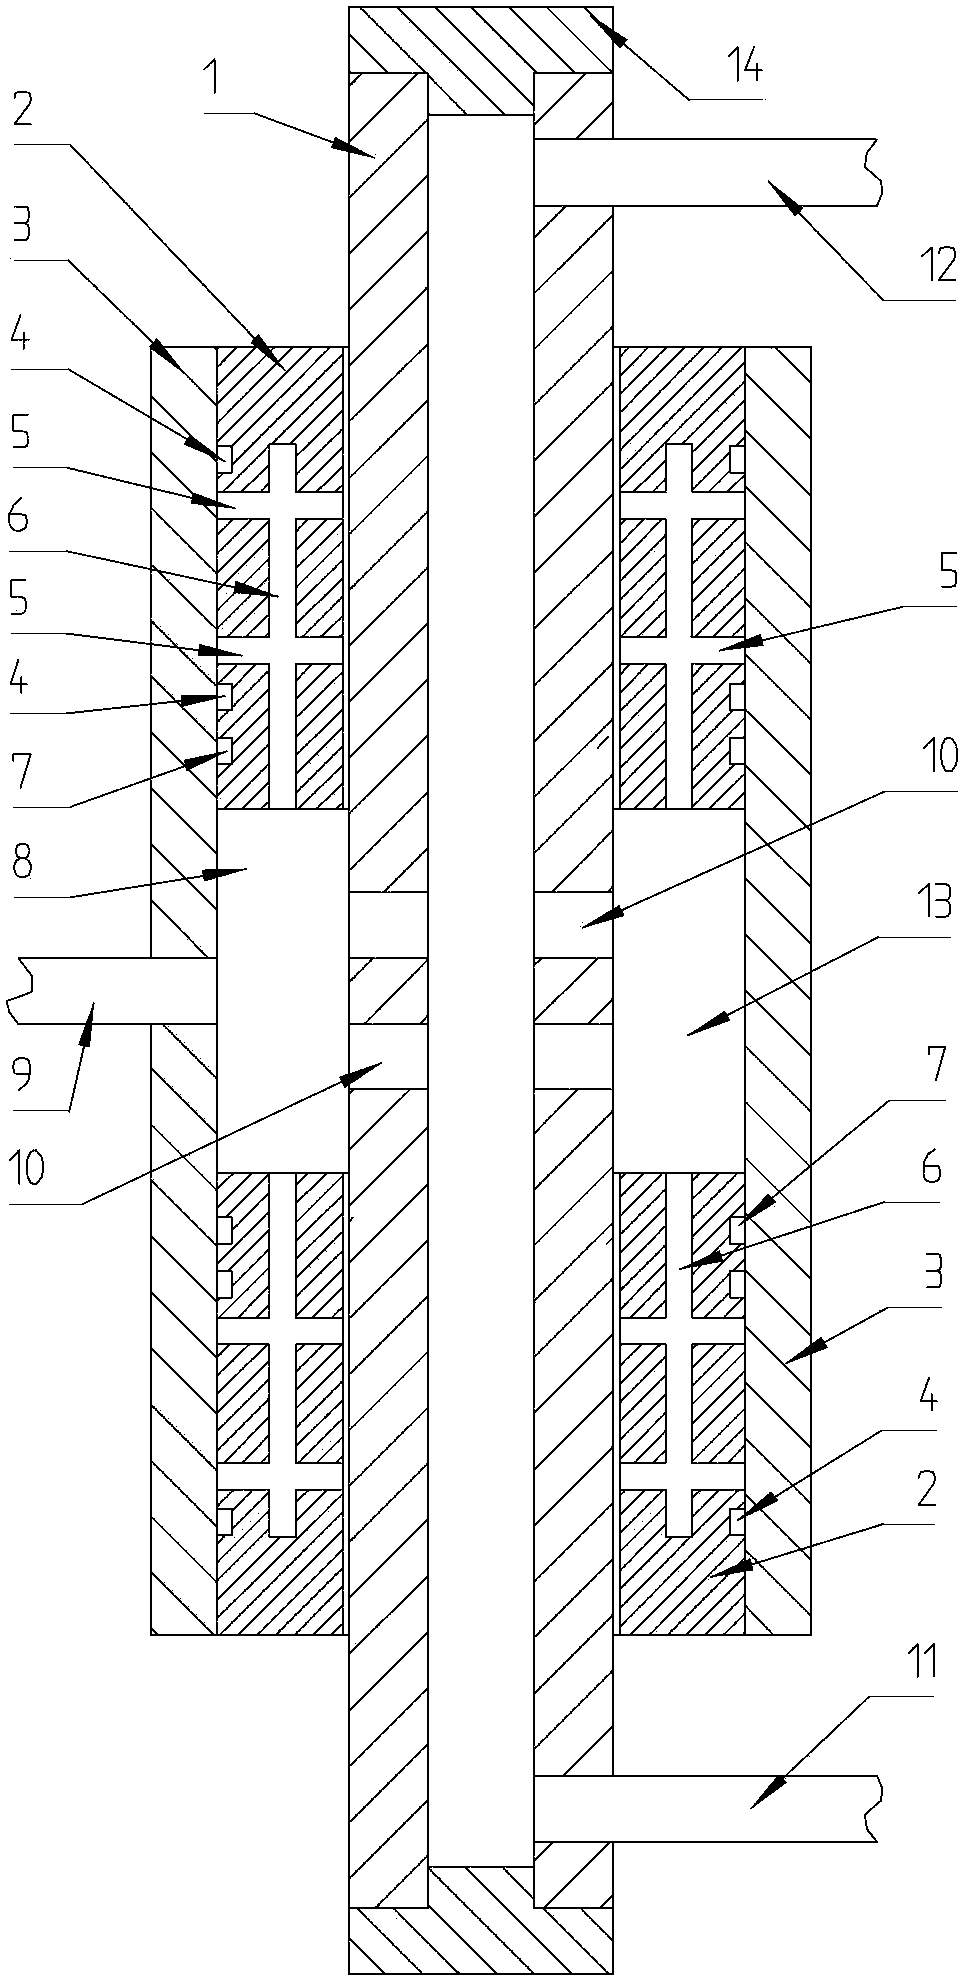 Rotary air supply device capable of supplying air in series